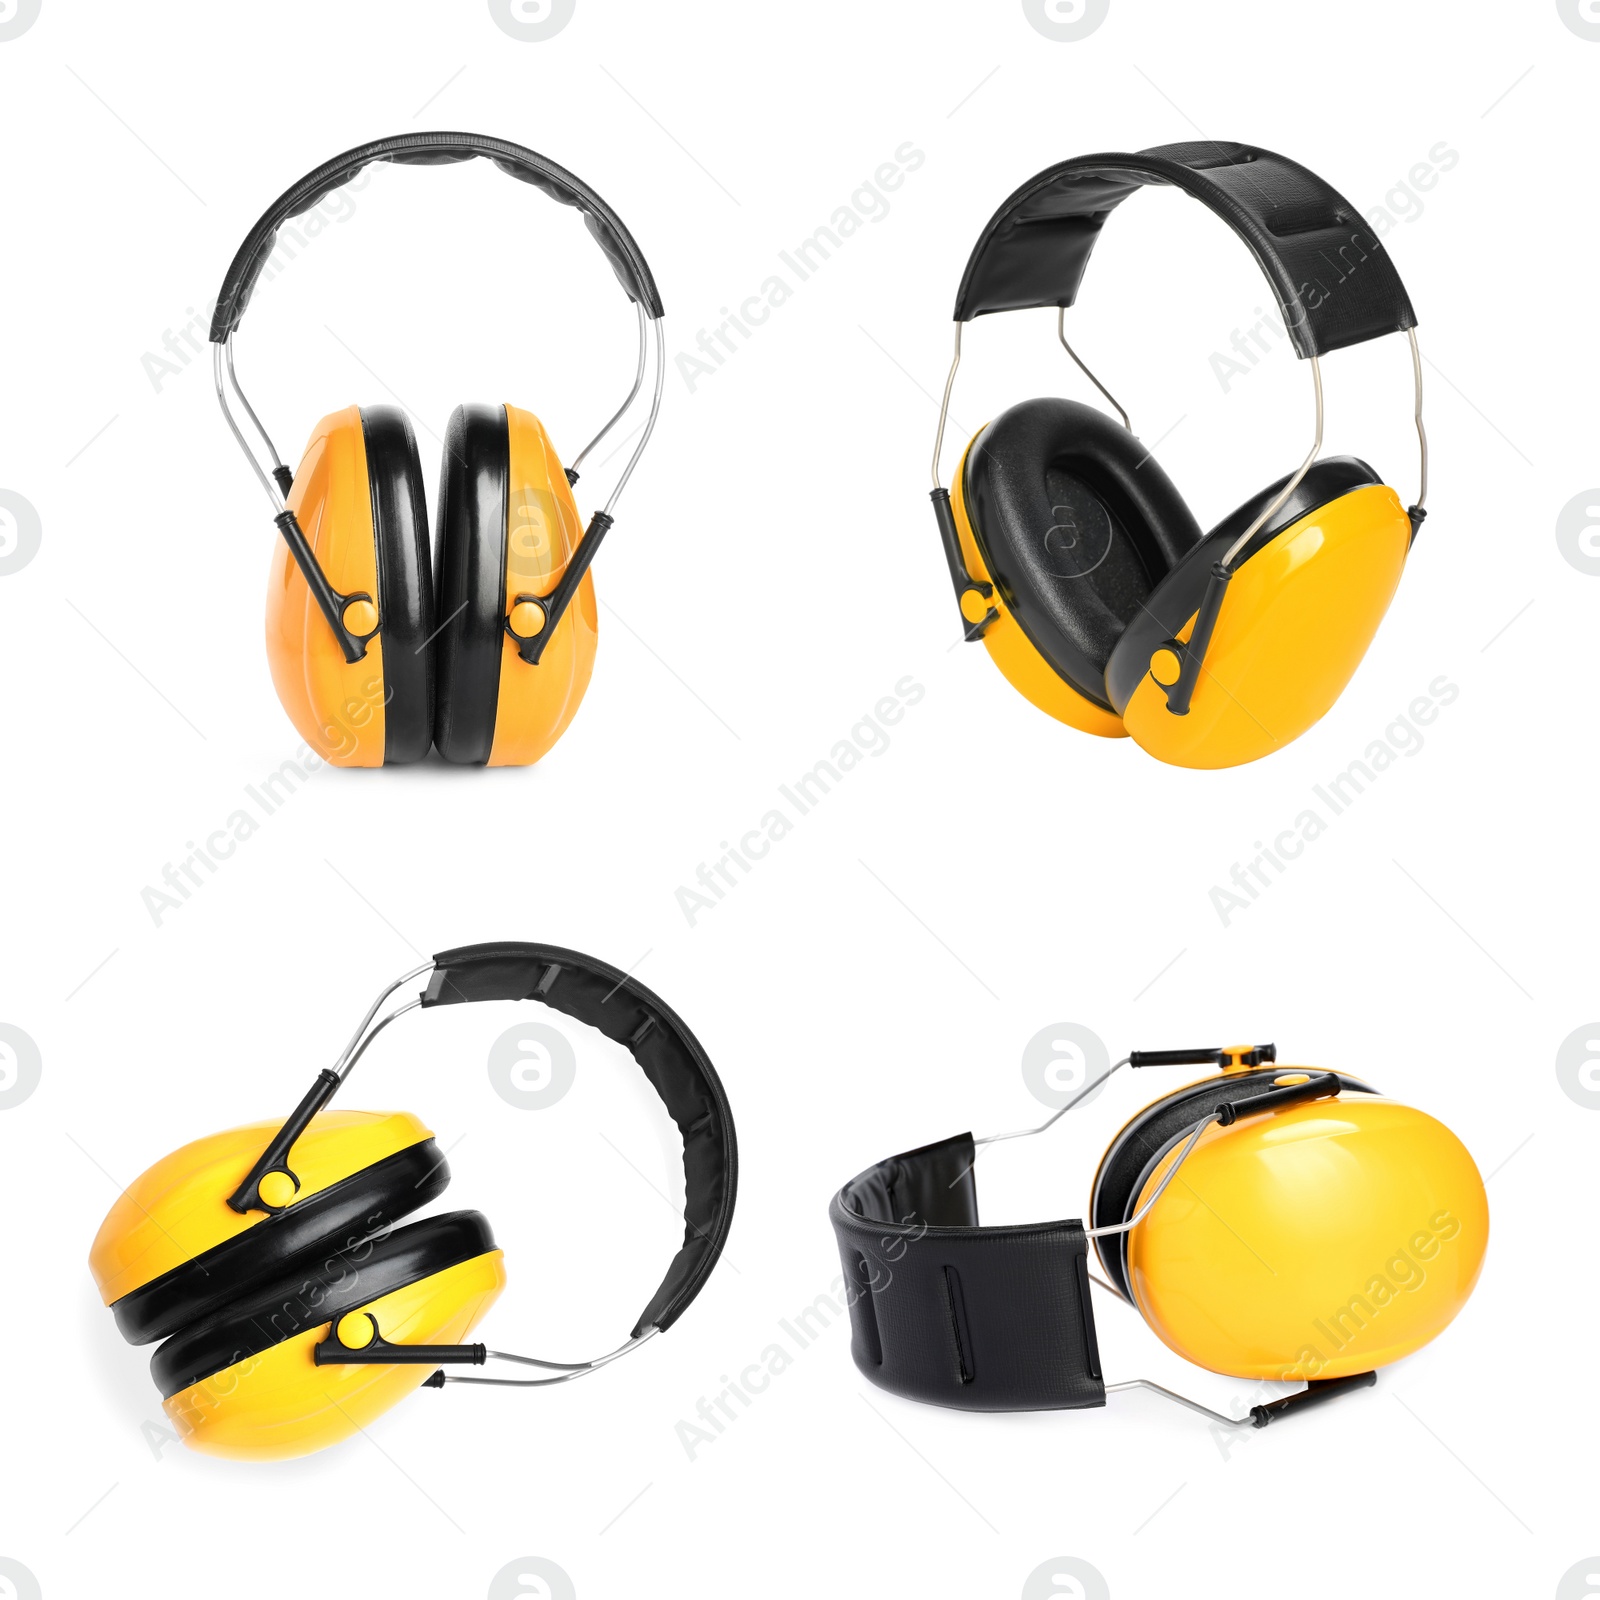 Image of Set with protective headphones on white background. Safety equipment